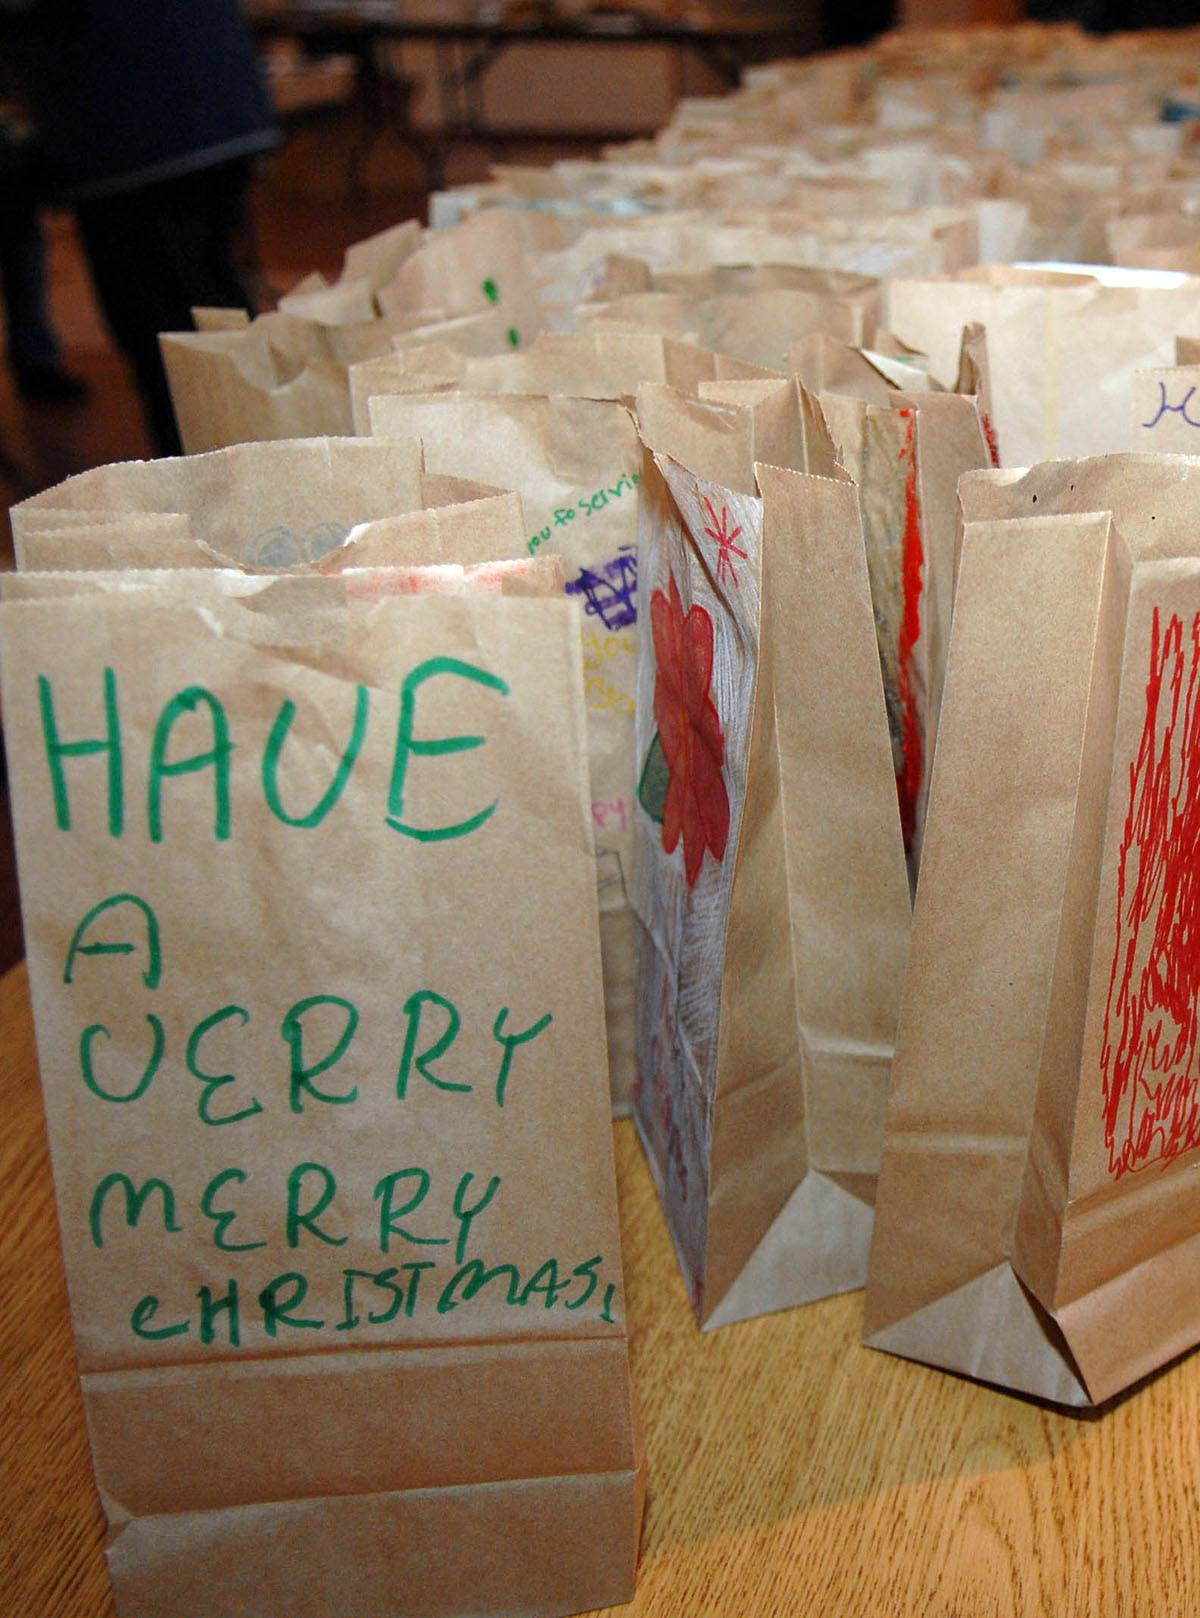 Bags of holiday cookies are destined for single servicemembers